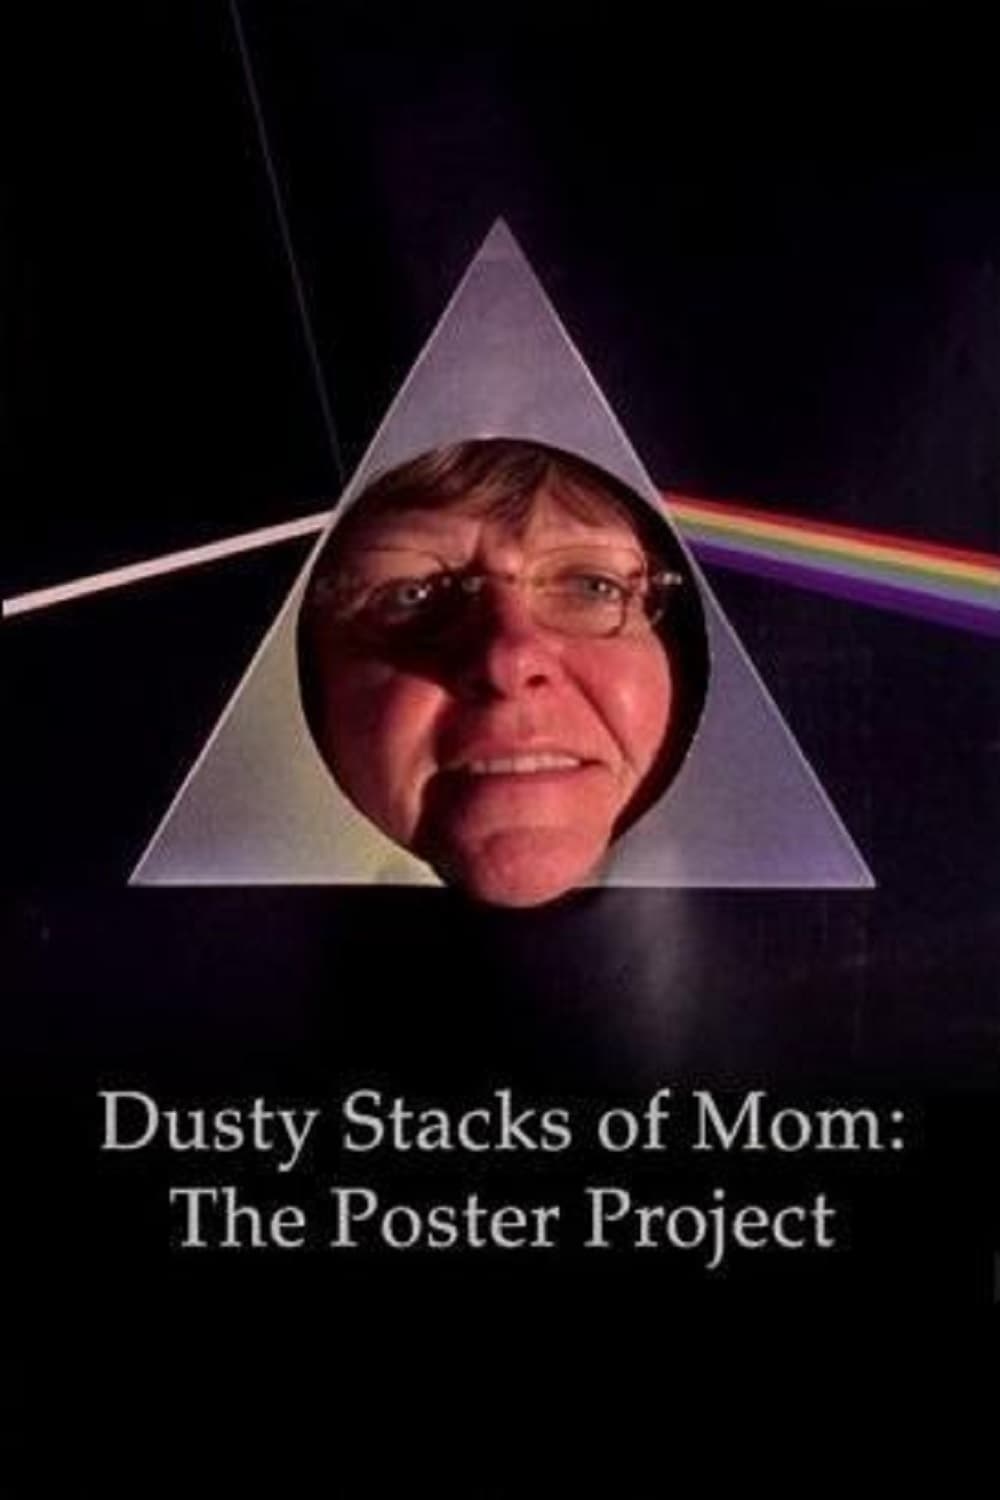 Dusty Stacks of Mom: The Poster Project